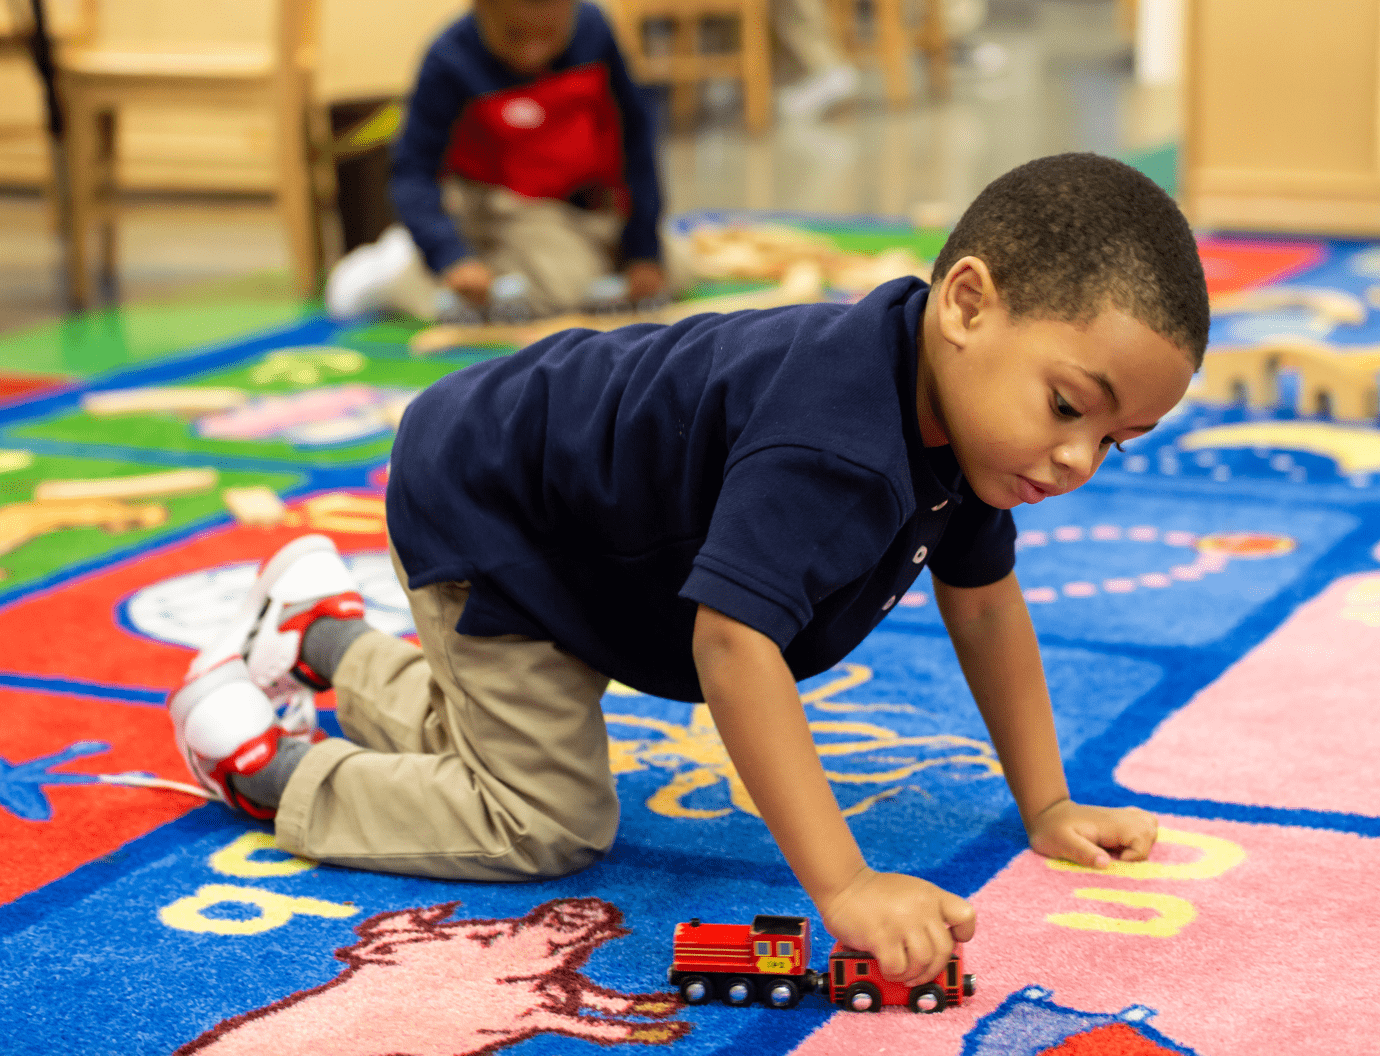 Boy playing with train on classroom carpet